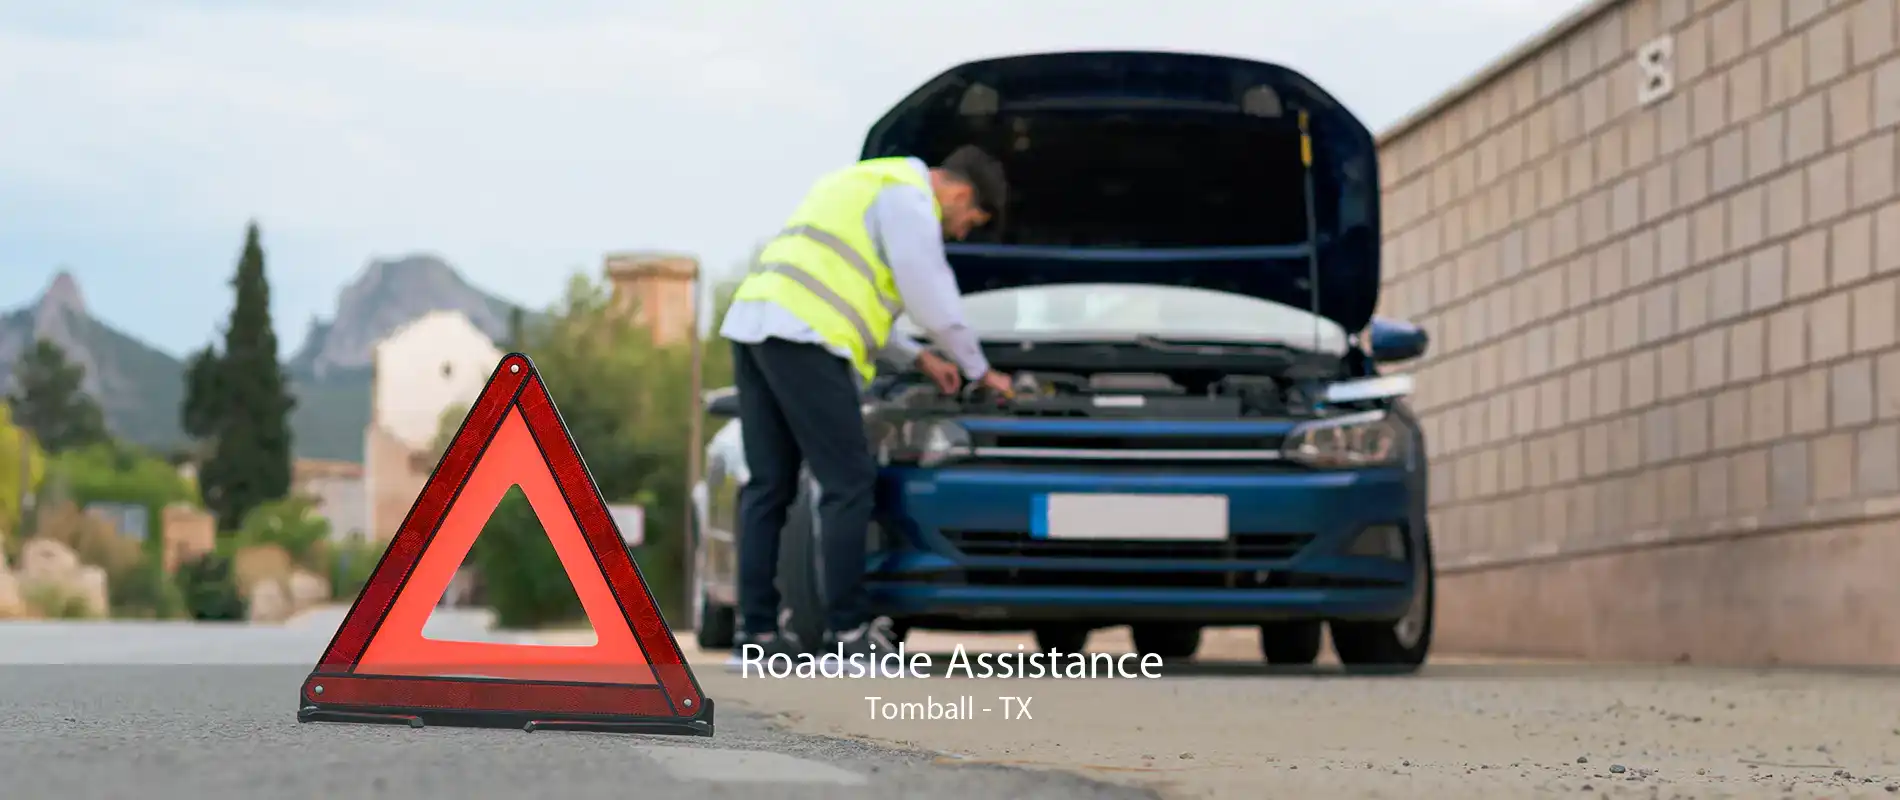 Roadside Assistance Tomball - TX